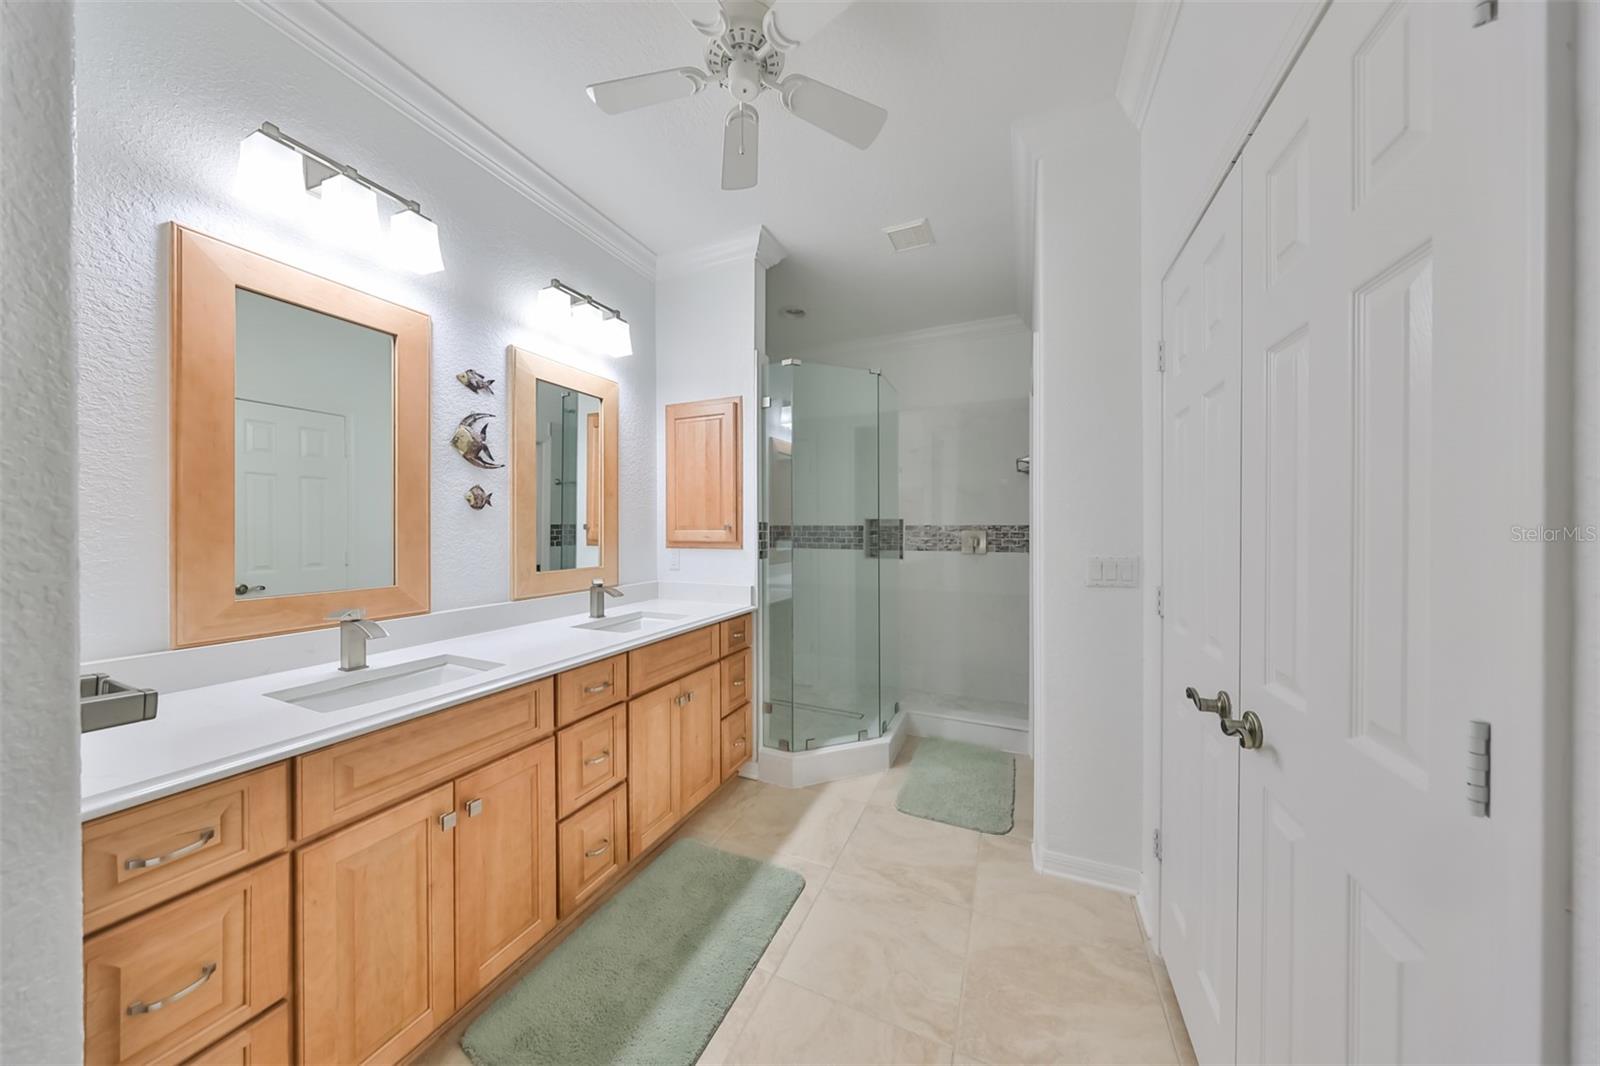 Owner suite - Ensuite Bathroom updated with wood cabinets/mirror frames/medicine cabinets, large walk in shower with high end faucets, dual sink, and separate water closet.